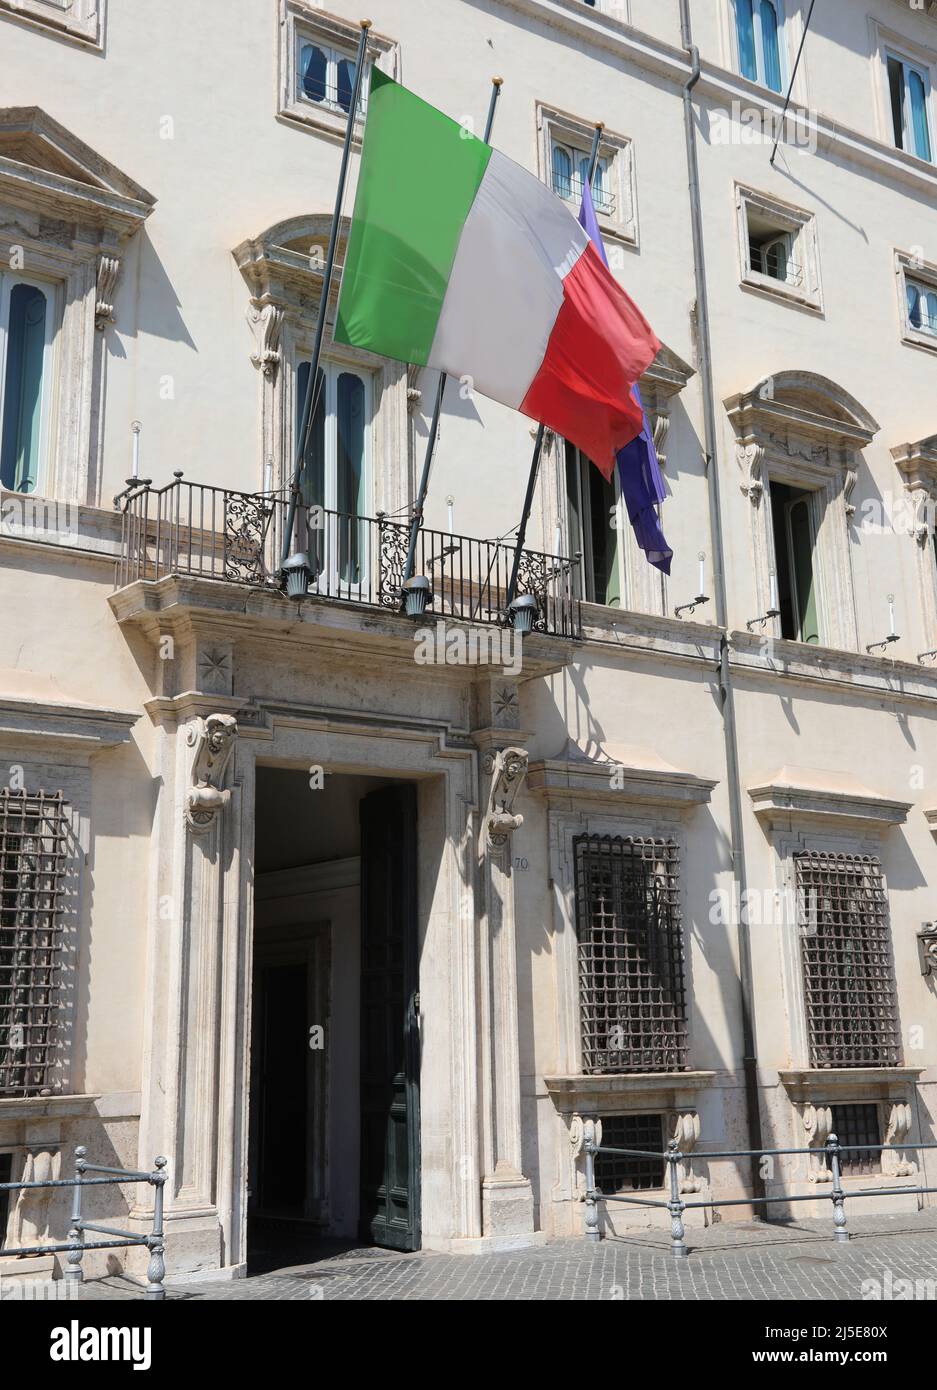 Rome, RM, Italy - August 18, 2020: Big Italian Flag at the entrance of Palazzo Chigi seat of the Italian government without people Stock Photo